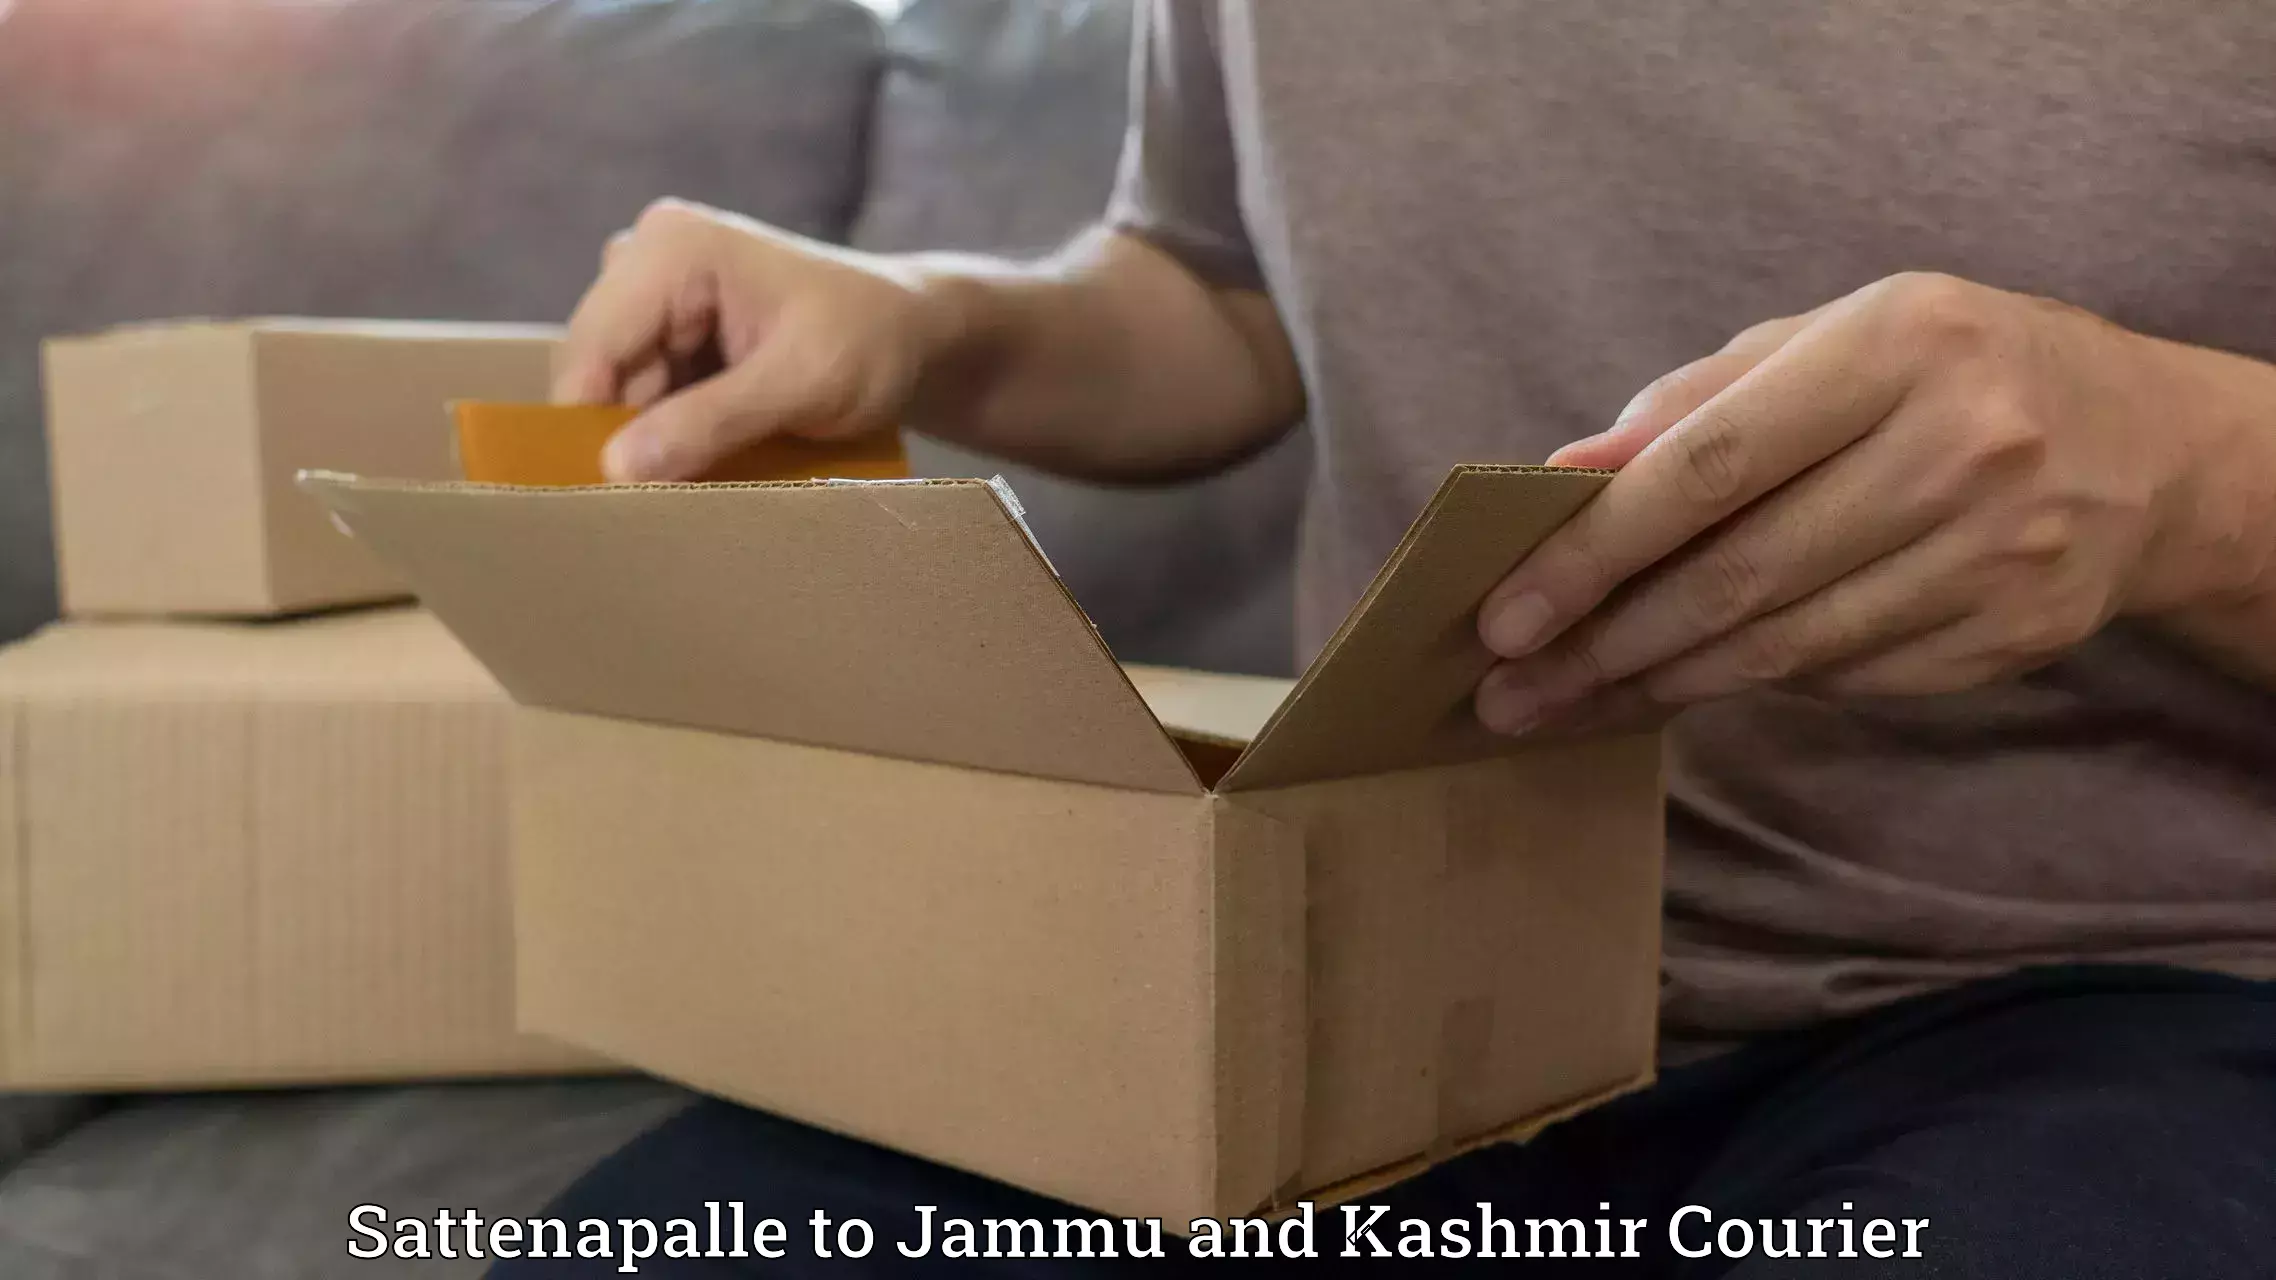 Next-day delivery options Sattenapalle to Srinagar Kashmir